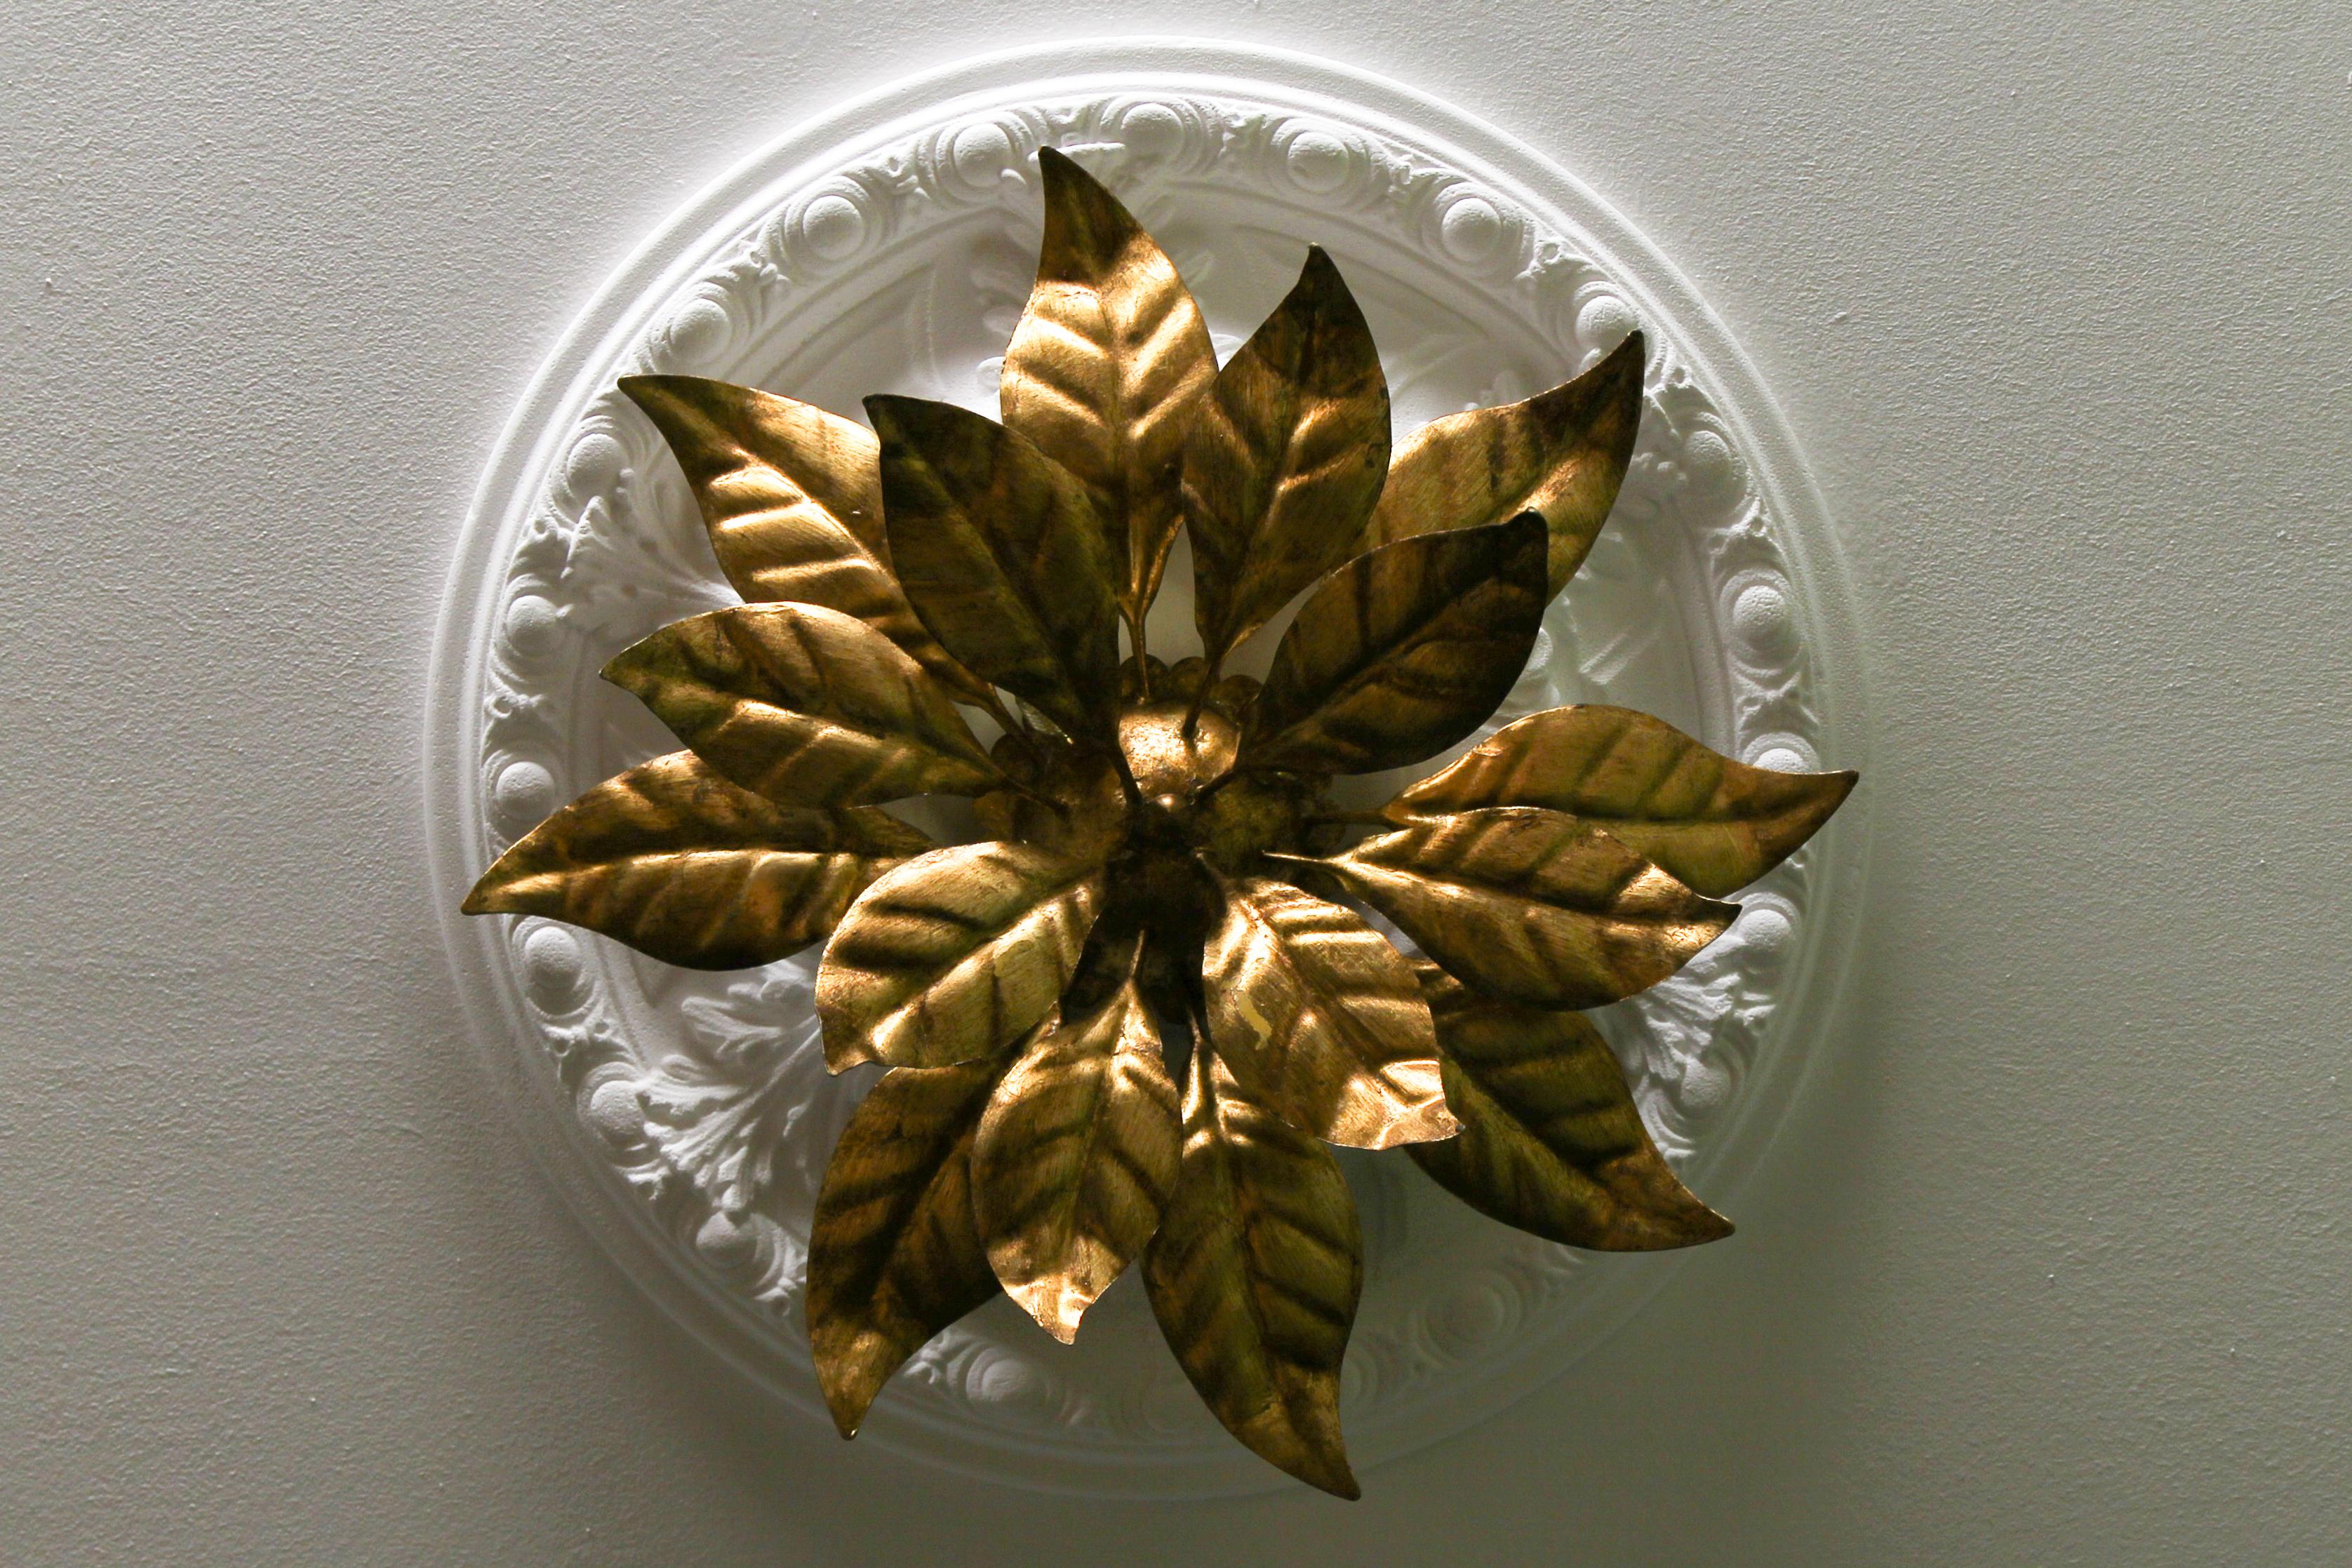 This gorgeous Hollywood Regency-style ceiling lamp is made of gilt metal and has four lights. It features beautifully sculpted golden leaves that form the shape of a large flower. The light fixture can be used as either a wall sconce or ceiling